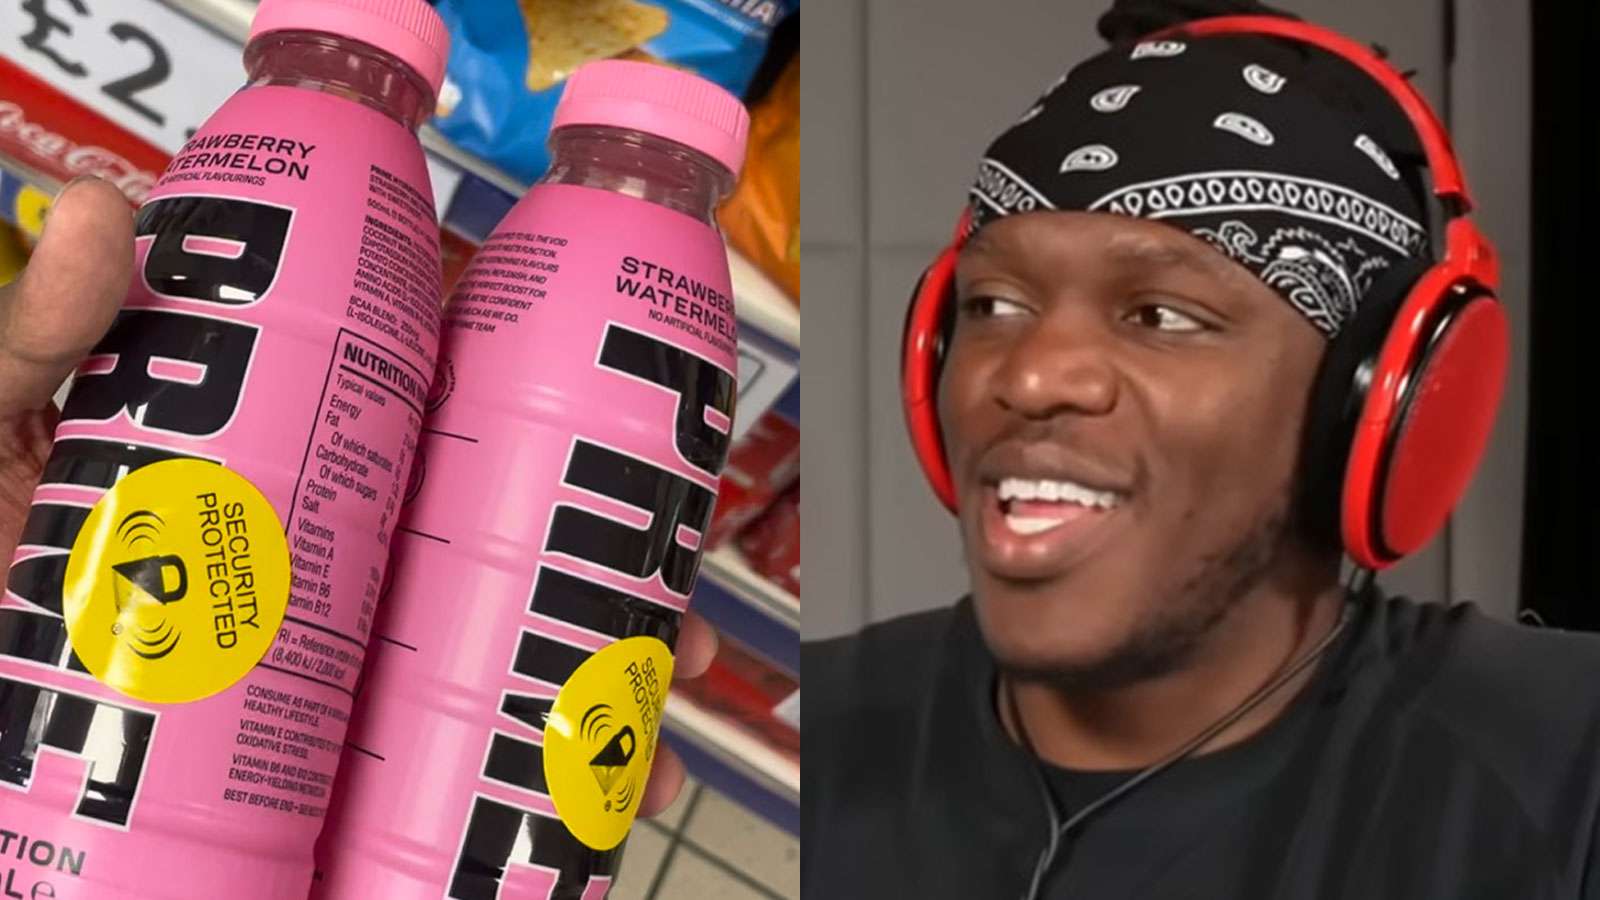 Prime Strawberry Watermelon flavor with security sticker on the bottle next to KSI